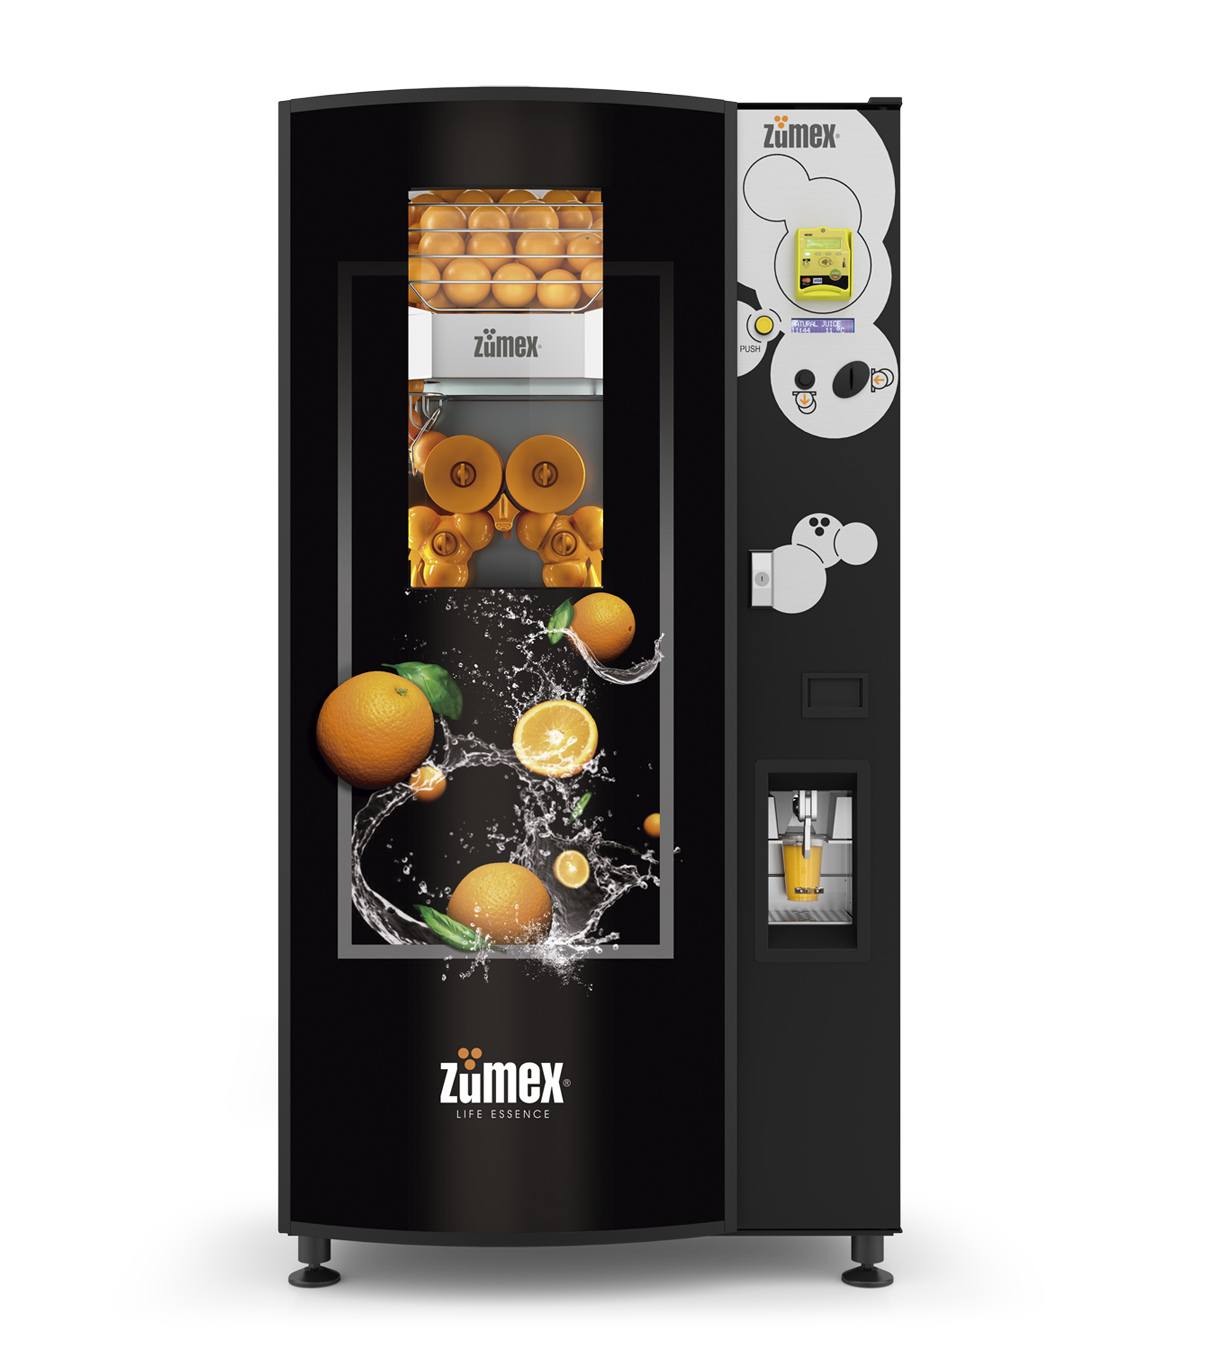 Natural Vending by ZUMEX®, the new smart machines for quick, healthy juice ‘on the go’